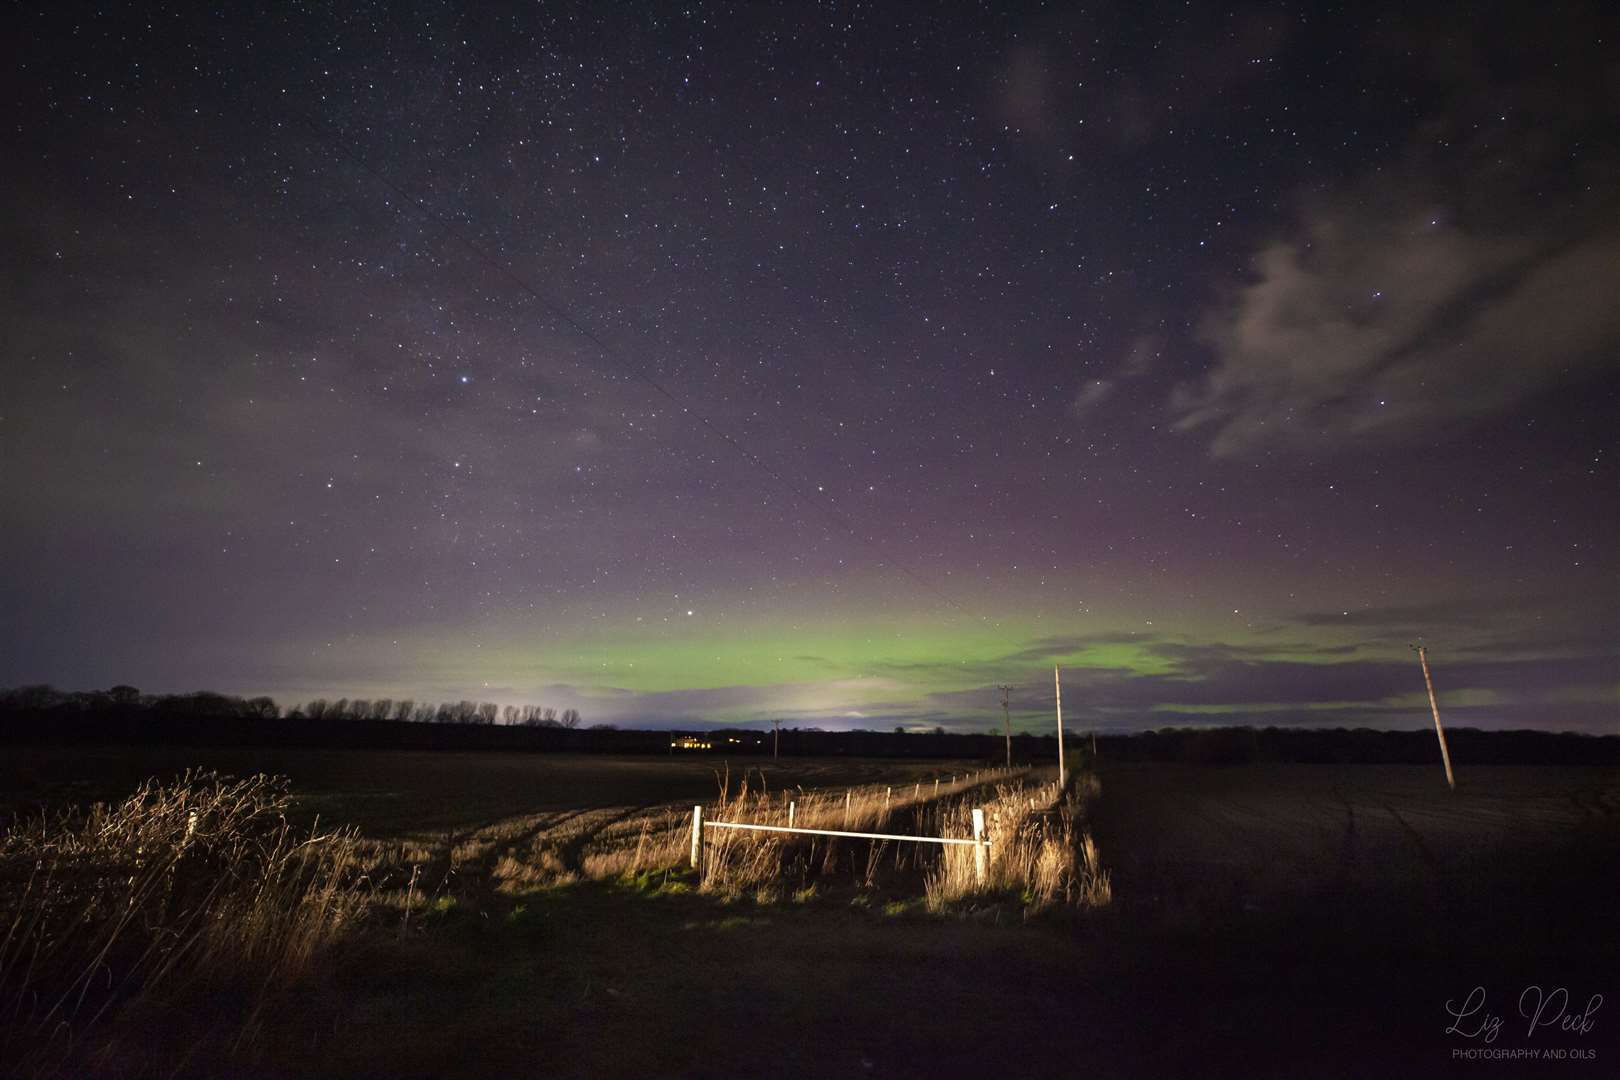 13th January. "As I arrived home from Nairn the sky cleared and the stars were blazing. My husband and I got back into the car and drove towards Cawdor, stopping in a layby just outside Clephanton. The northern sky was glowing green with a nice purple topping. Just as I pressed the shutter button a car came down the road illuminating the gate and fence of the field, providing a nice foreground". Picture by: Liz Peck photography.